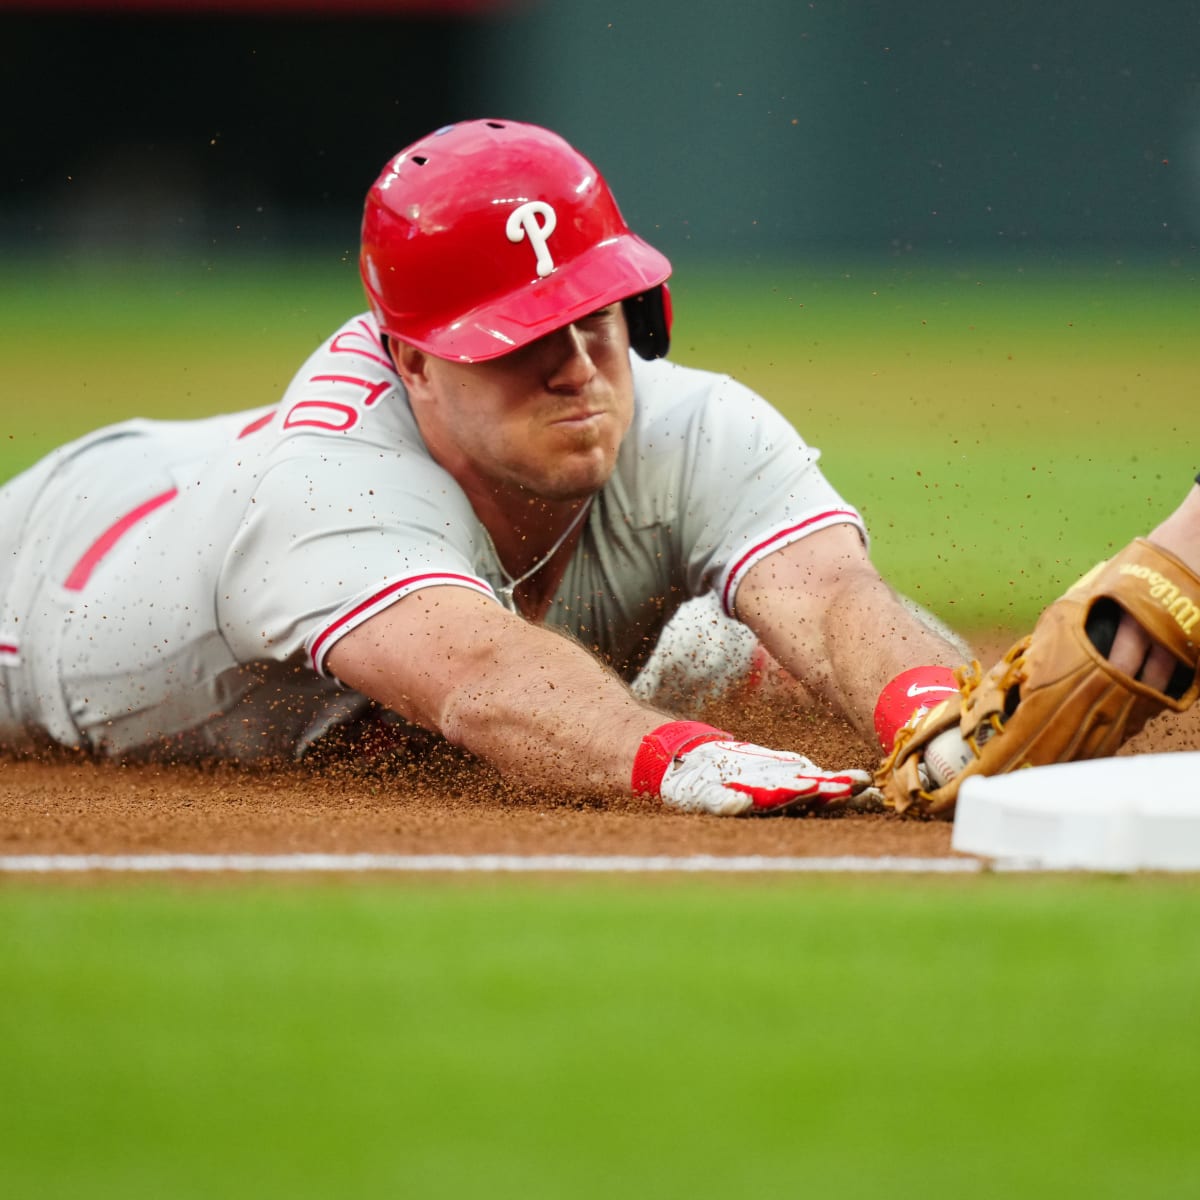 J.T. Realmuto catching for Phillies on Wednesday